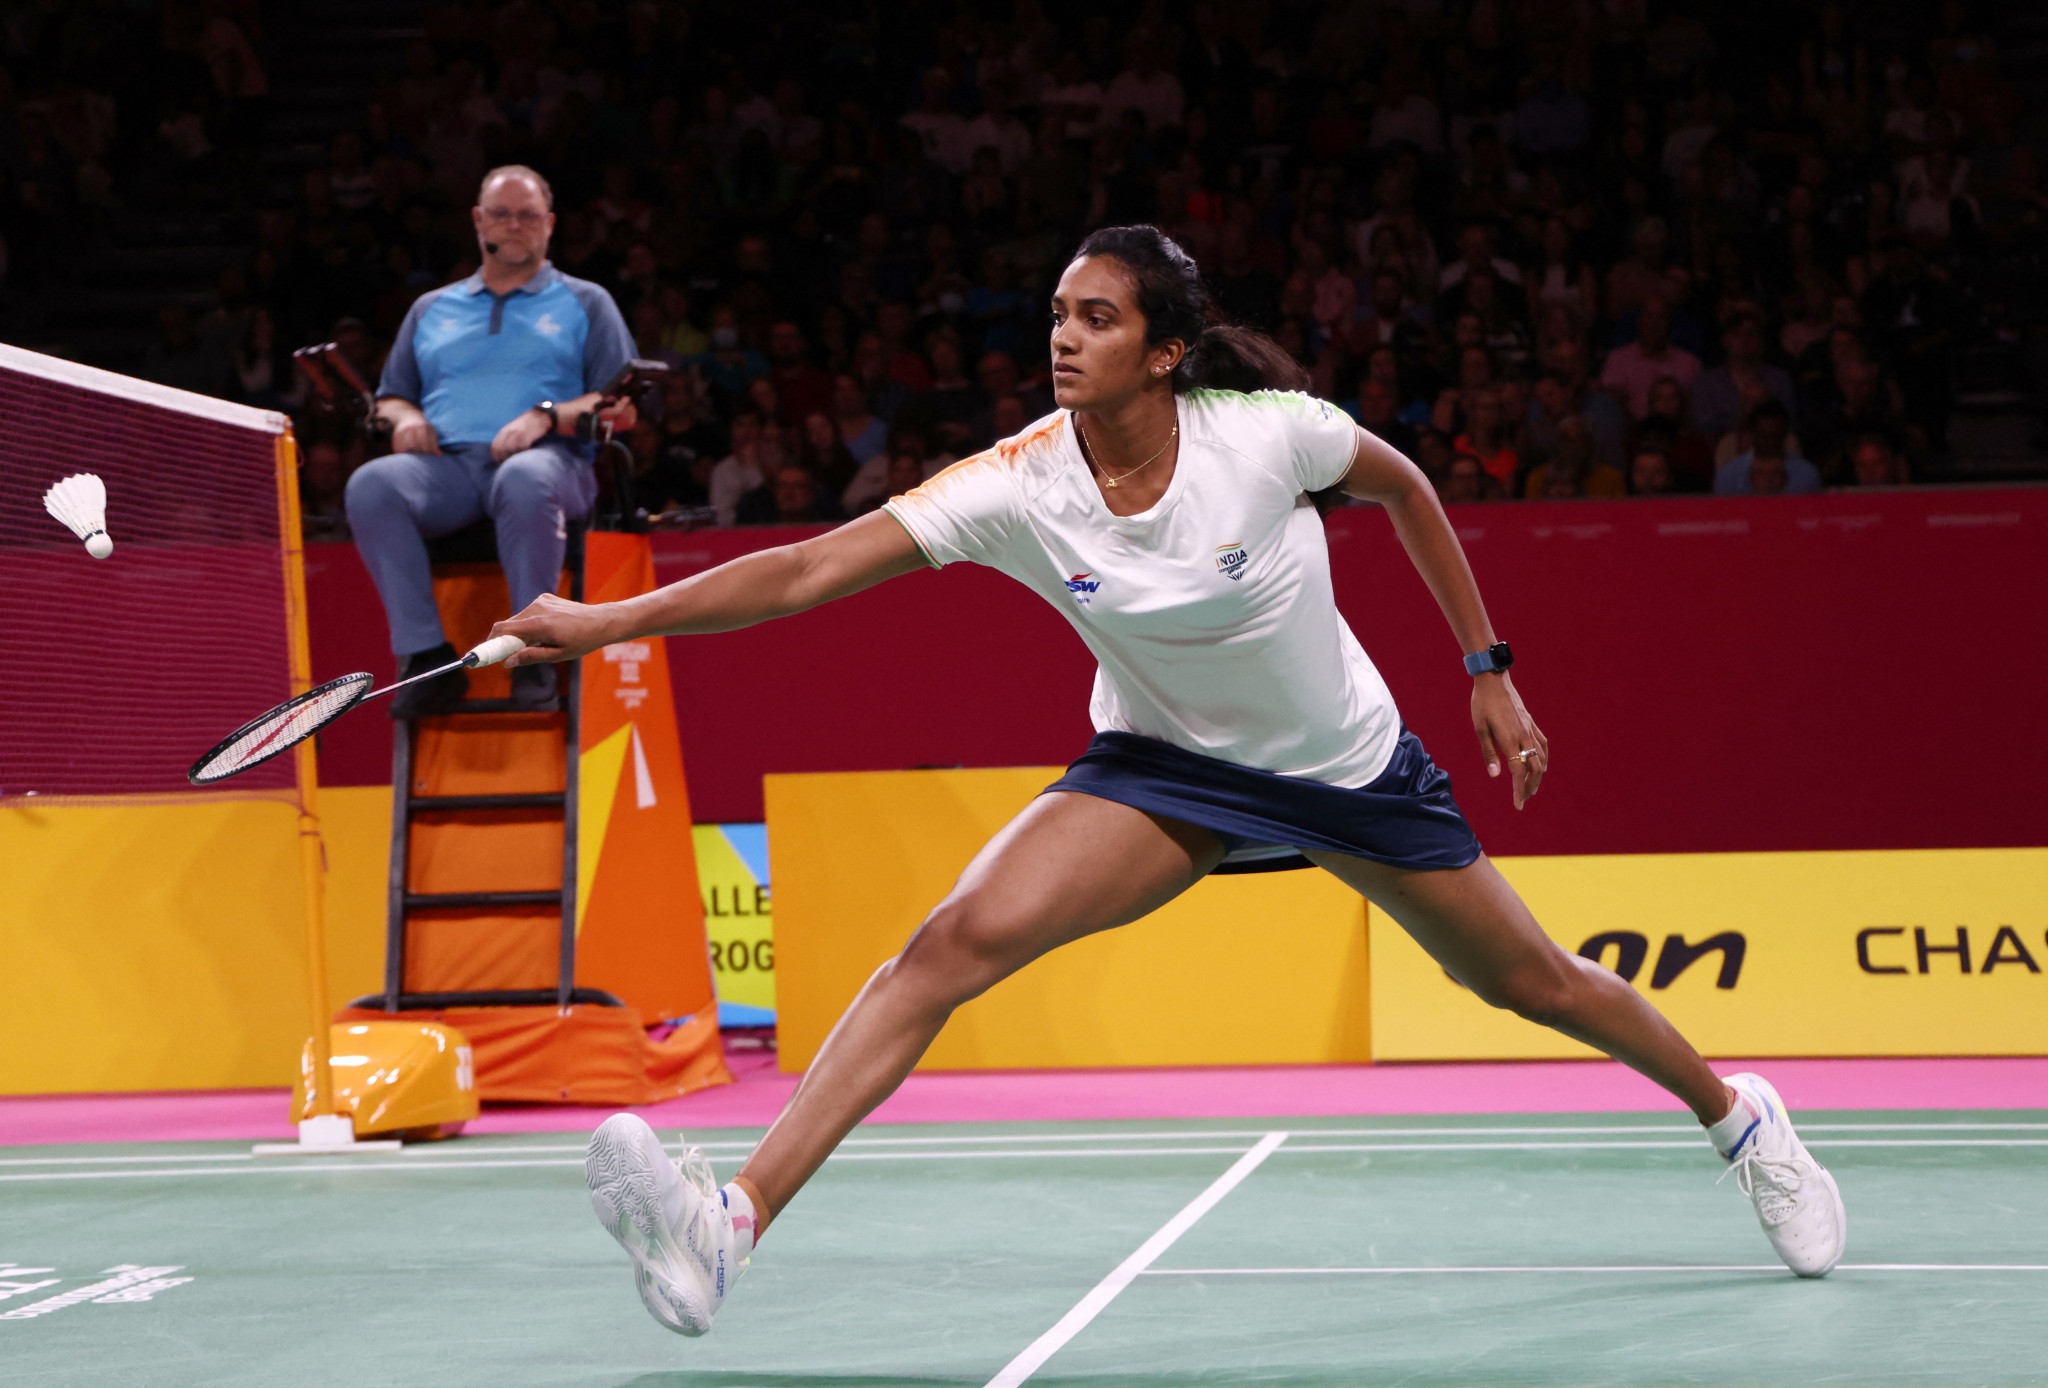 PV Sindhu is one of India's athletes working with Reliance Foundation for the Lehra Do campaign ©Getty Images